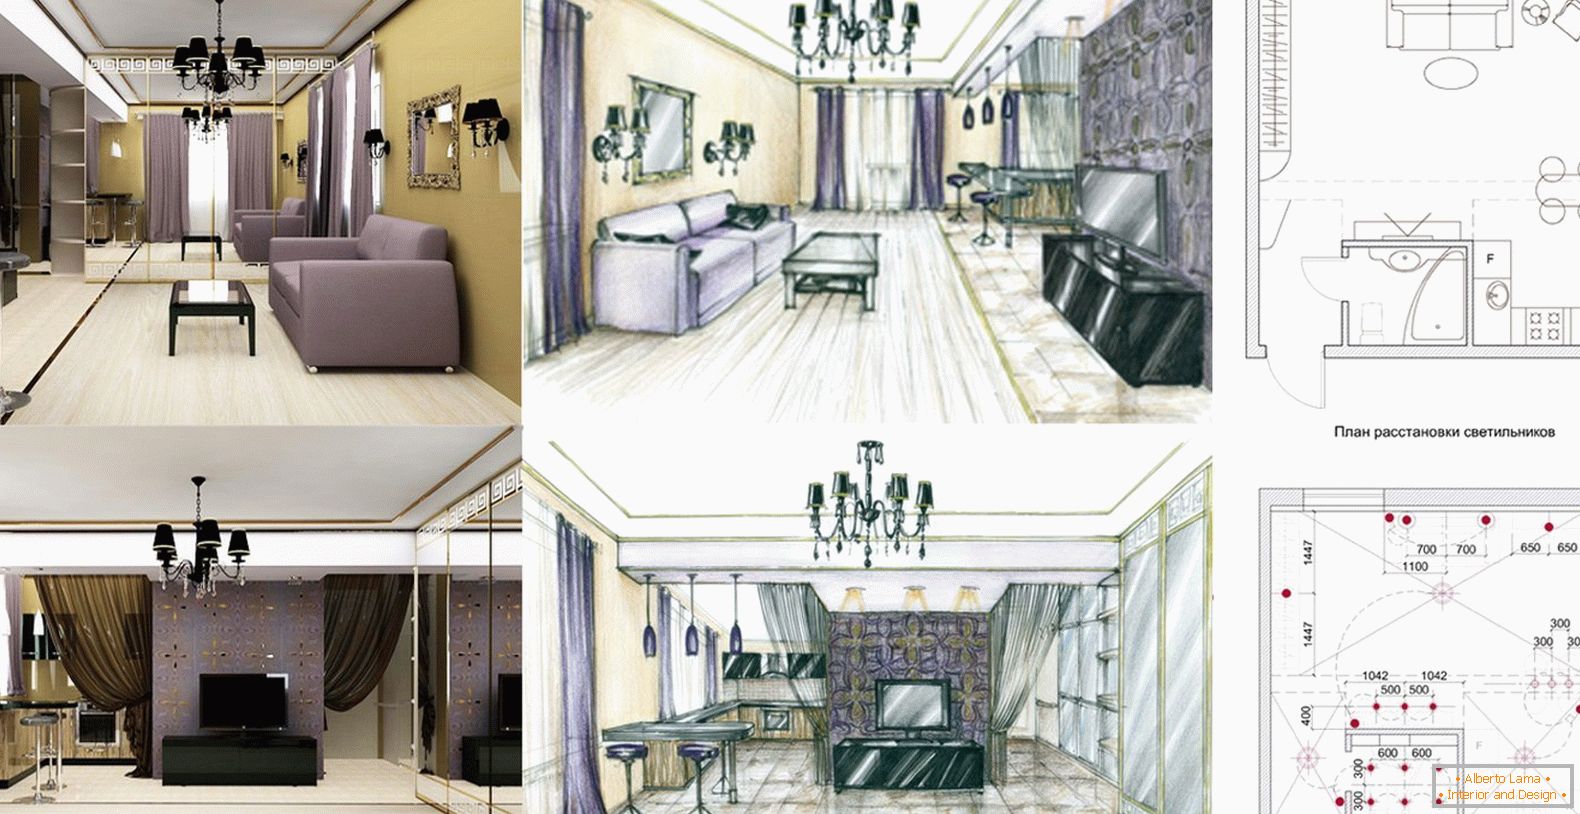 Detailed design of the room